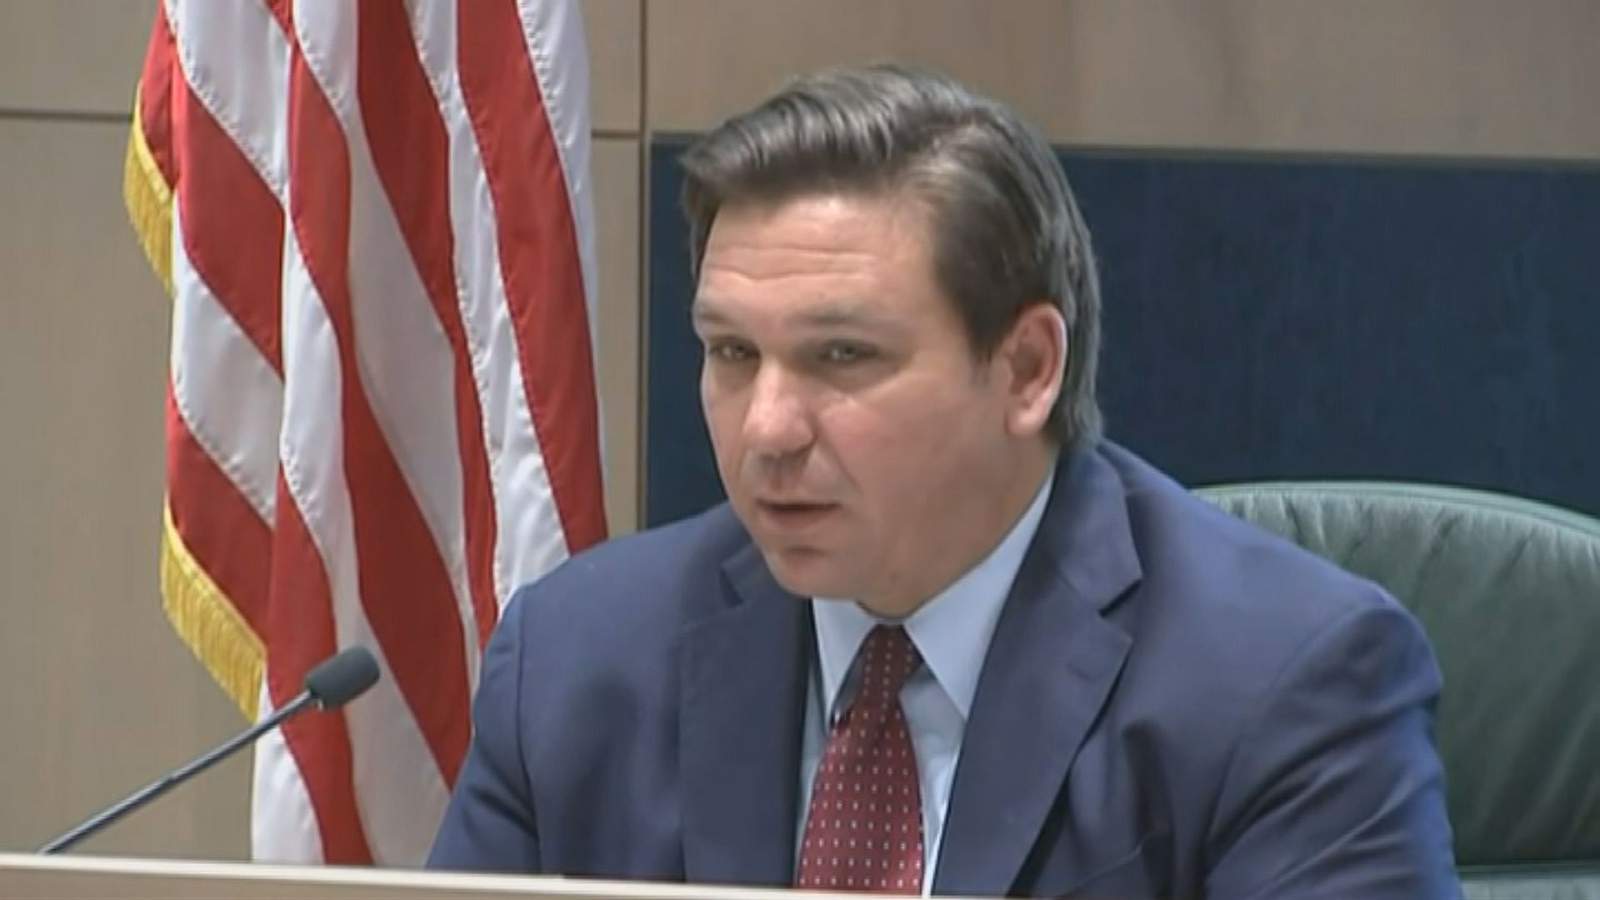 WATCH LIVE: Gon. Ron DeSantis hosts news conference in Miami